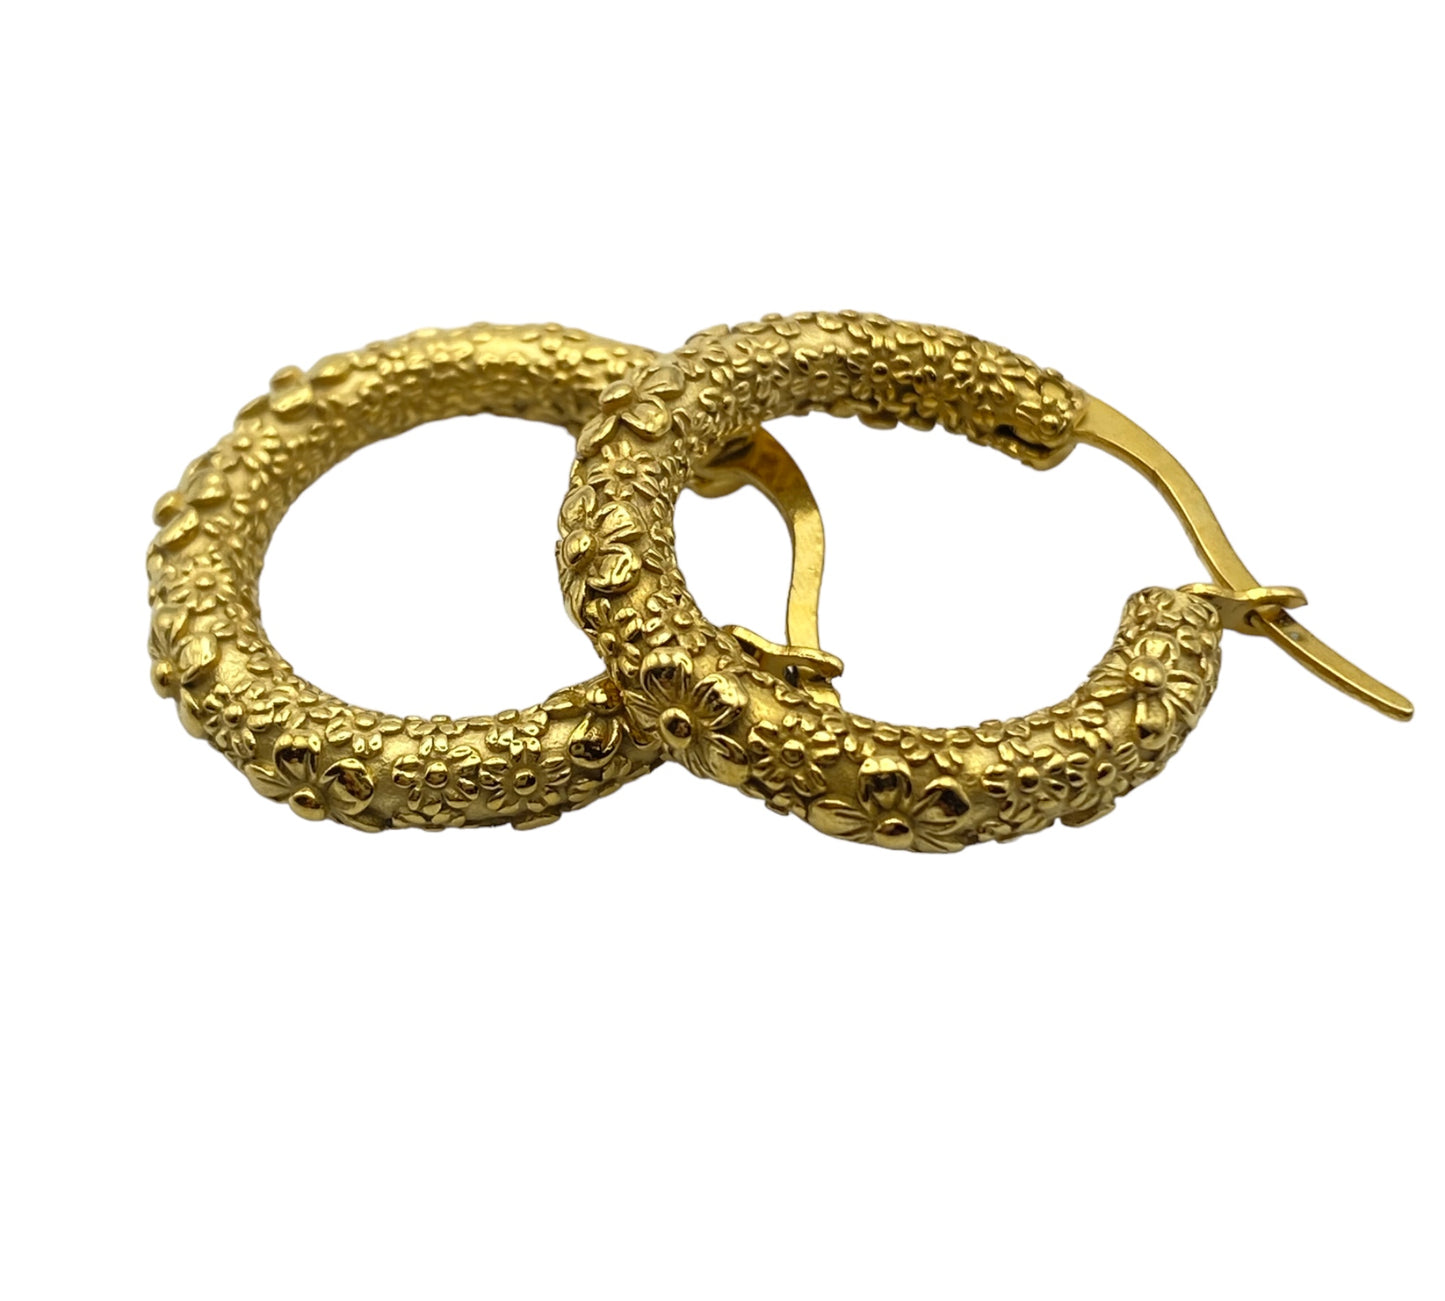 "LYRIC" gold plated hoop earrings with flower carved pattern